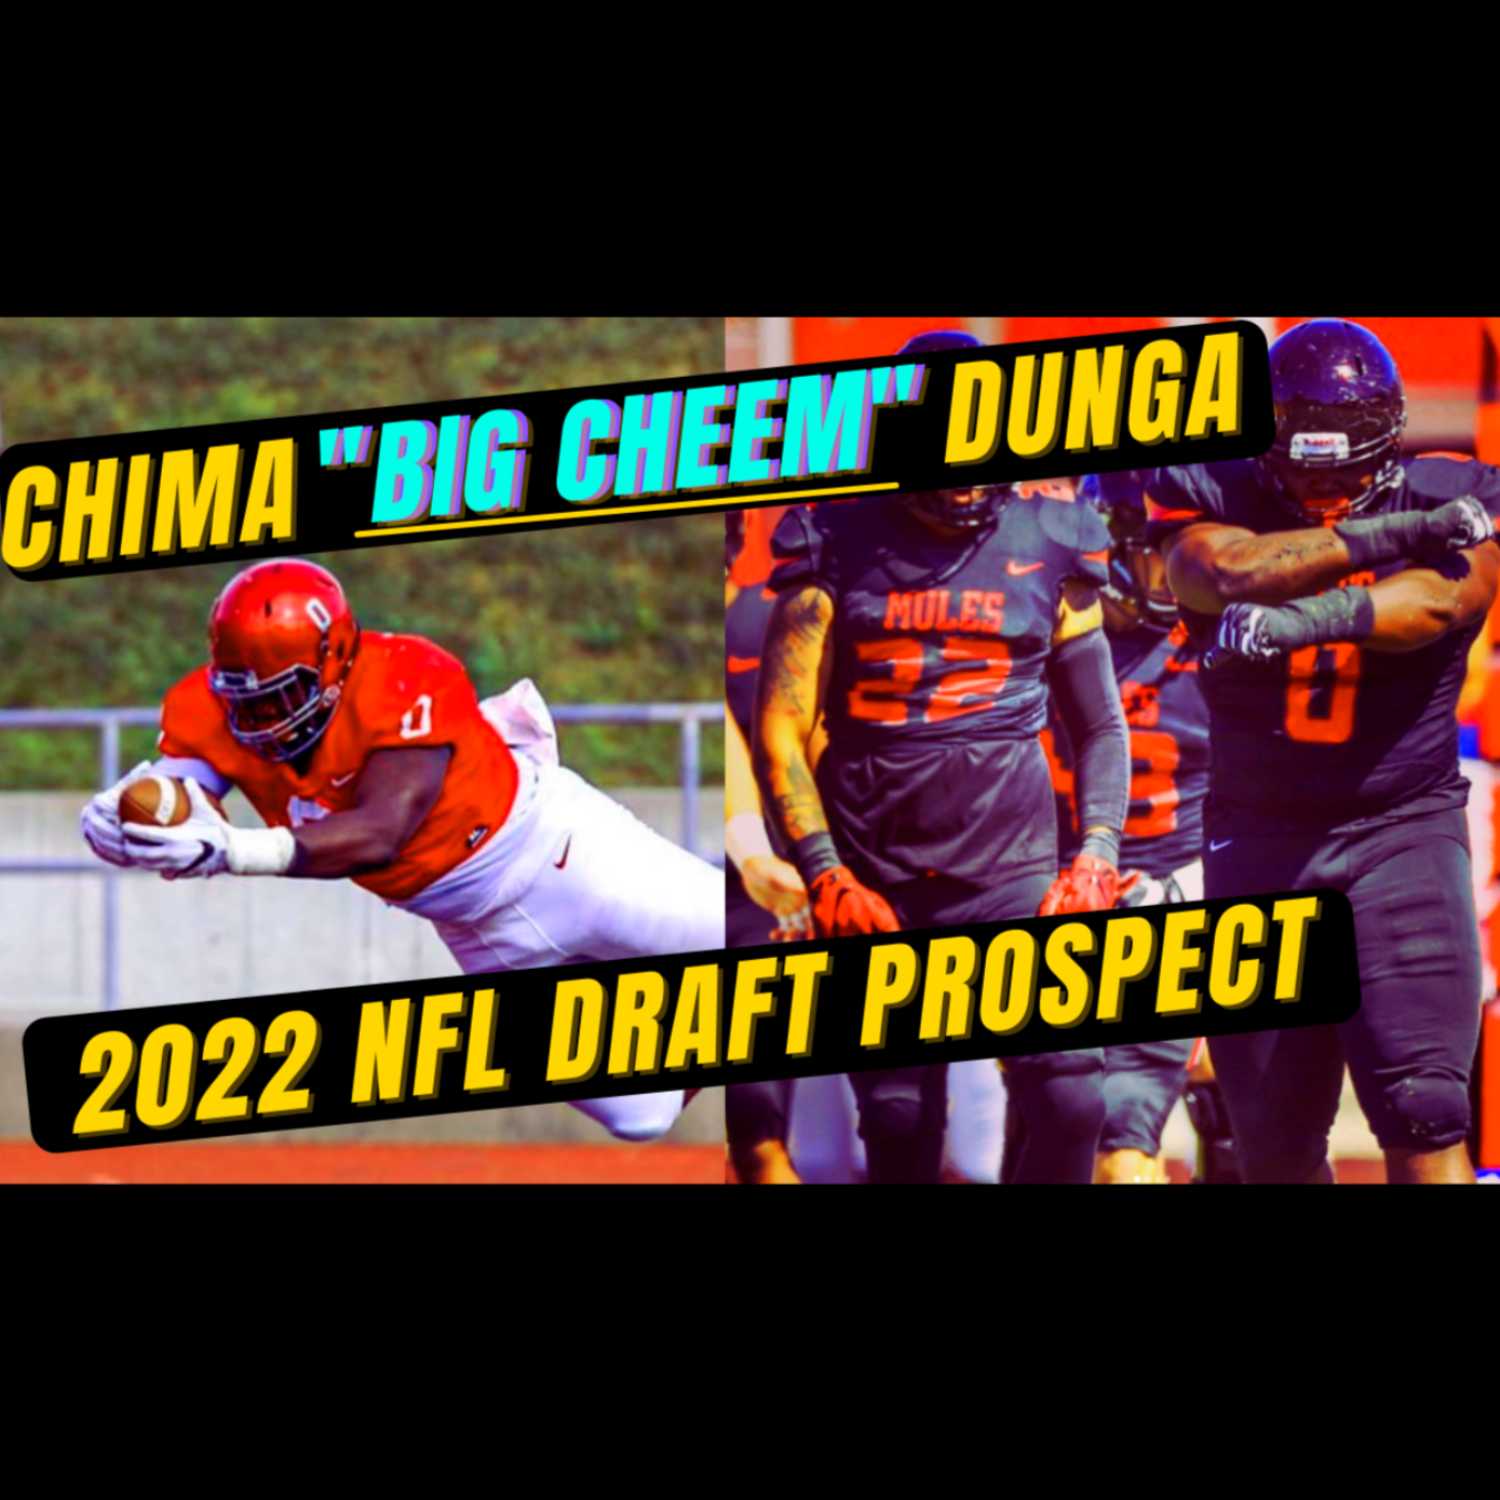 2022 NFL Draft Prospect CHIMA DUNGA “King of the trenches”